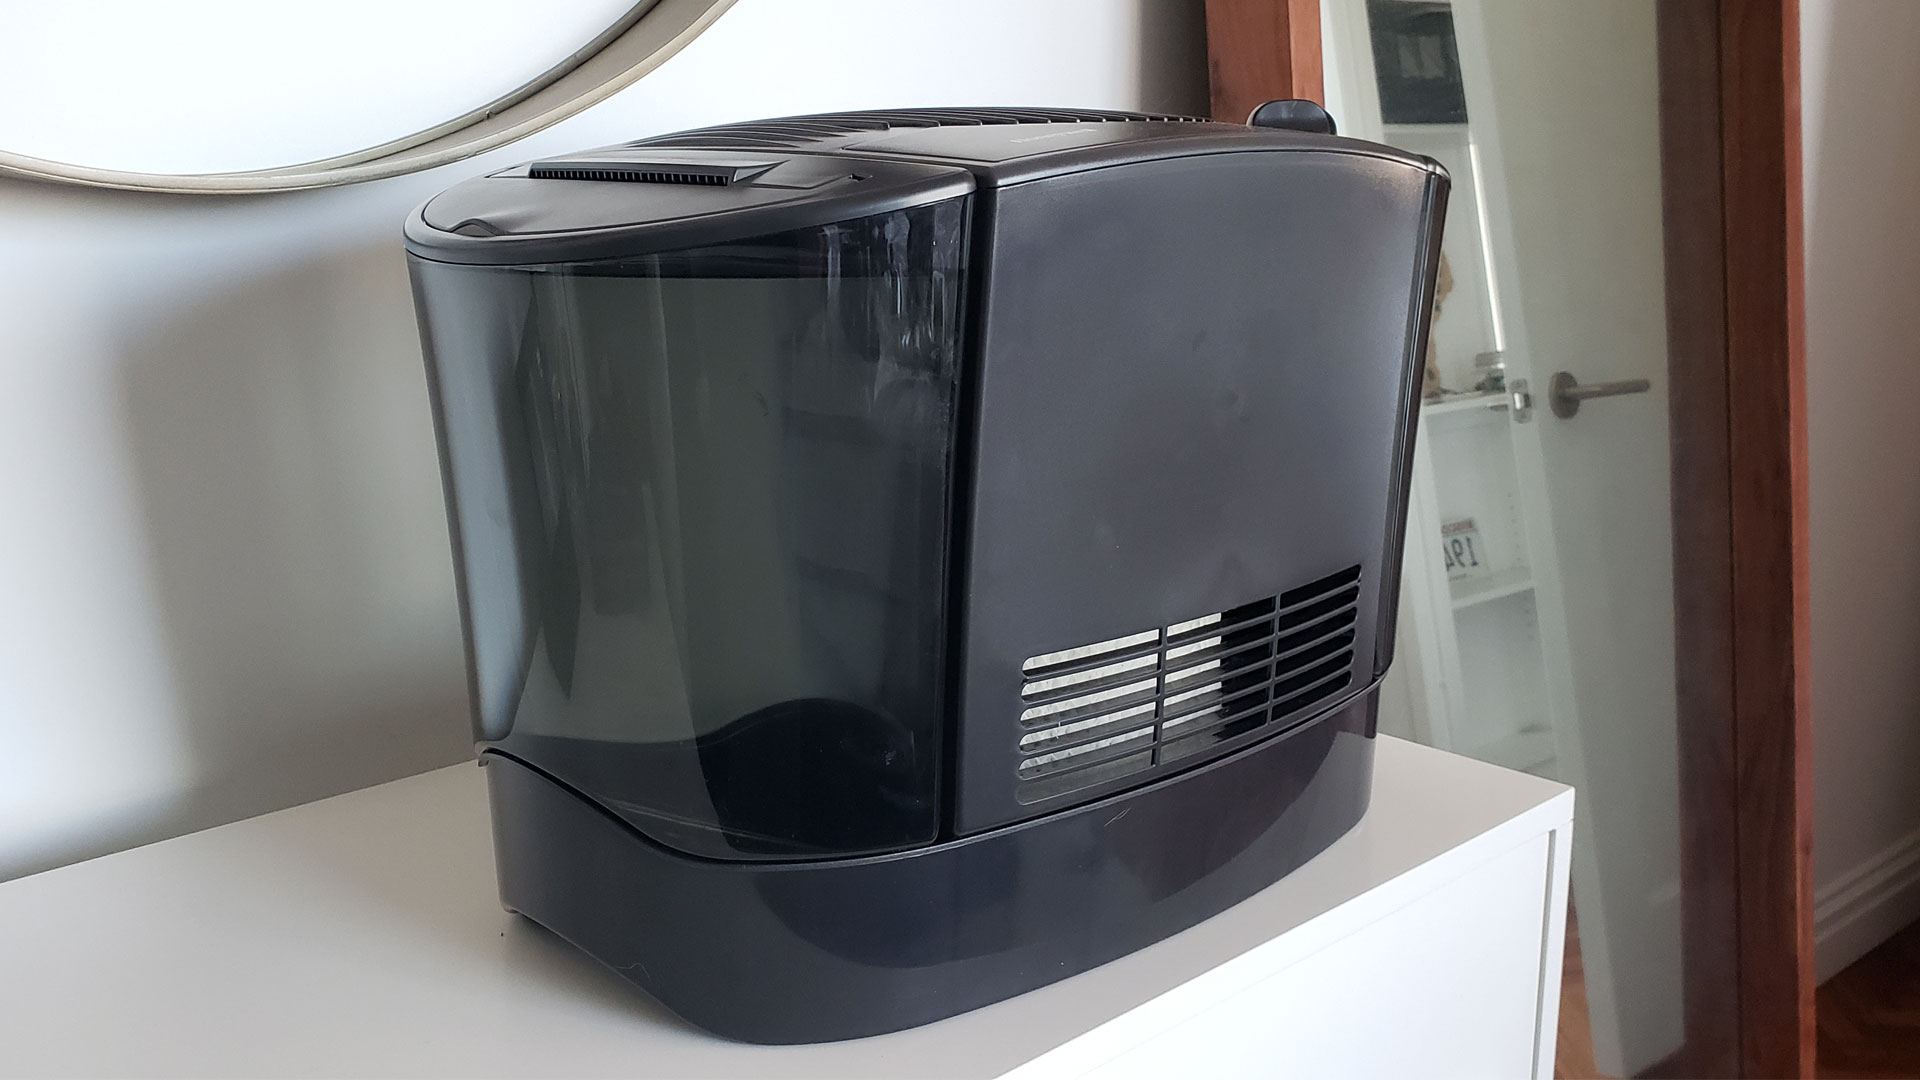 Honeywell HEV685W review: image shows Honeywell HEV685W humidifier